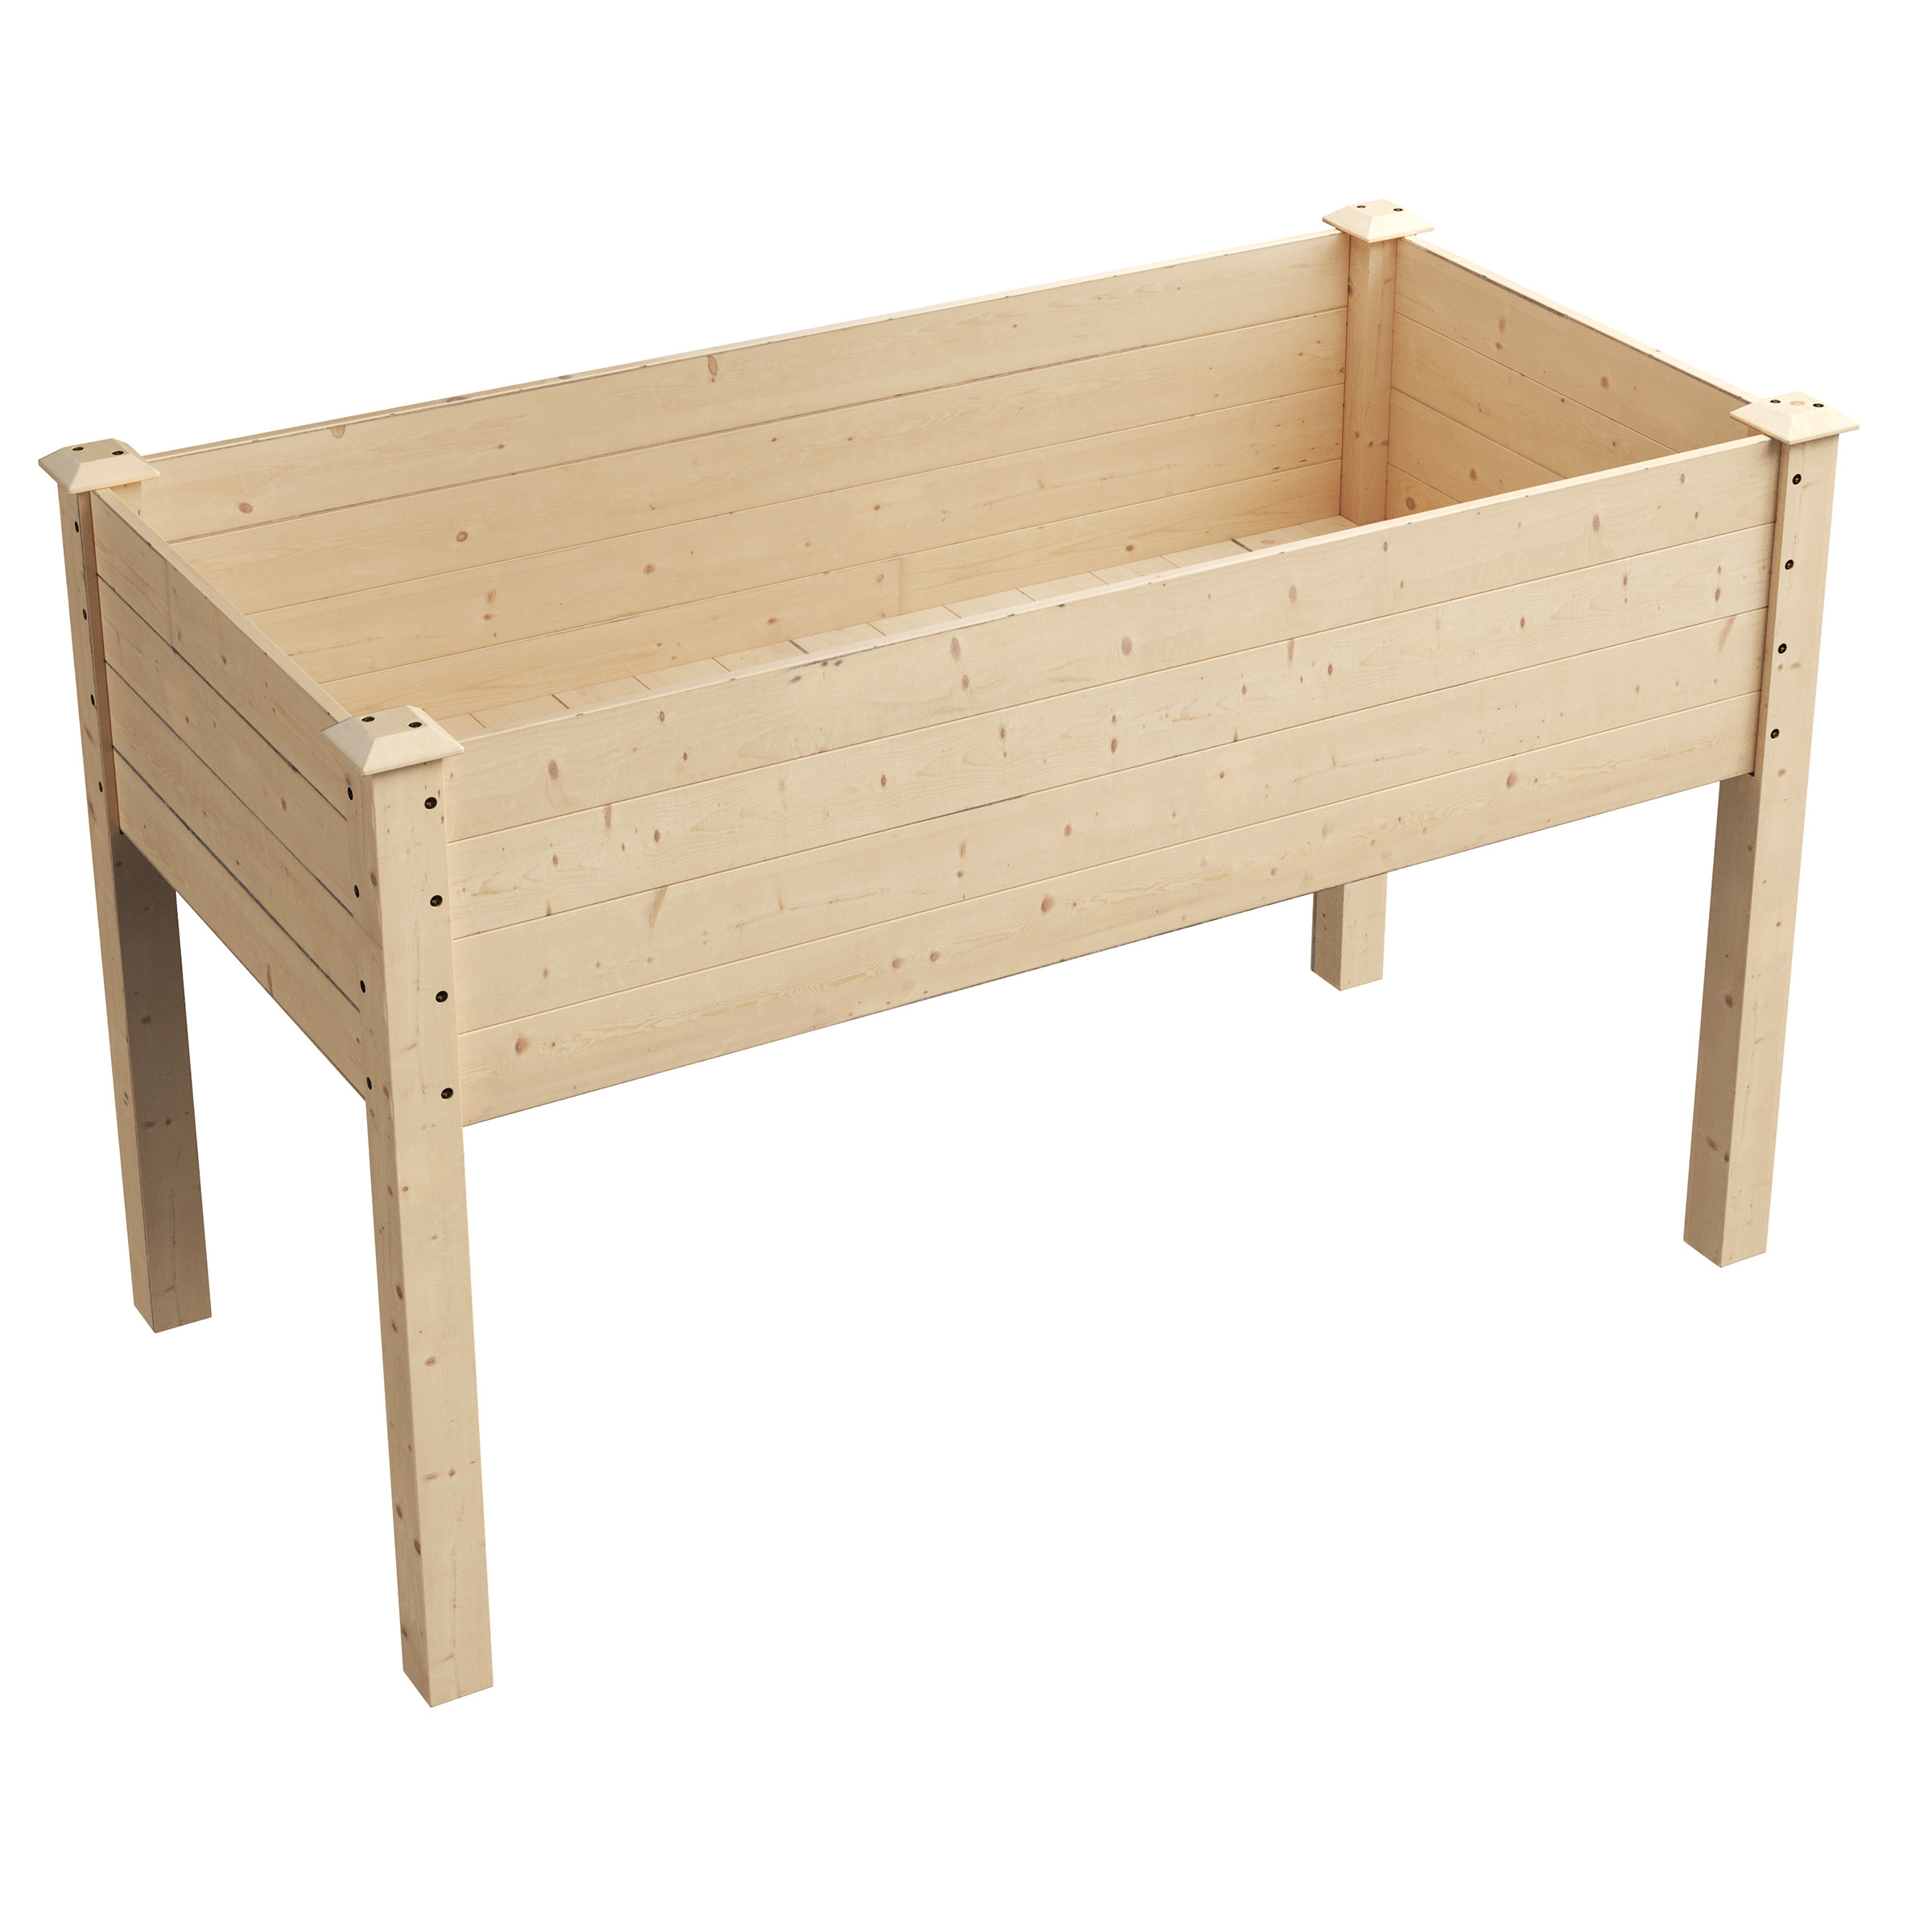 Raised Garden Bed - 48 X 24 X 30-Inch Wood Planter Box With Liner - 5 Cubic Feet Capacity - Gardening Supplies By Home-Complete